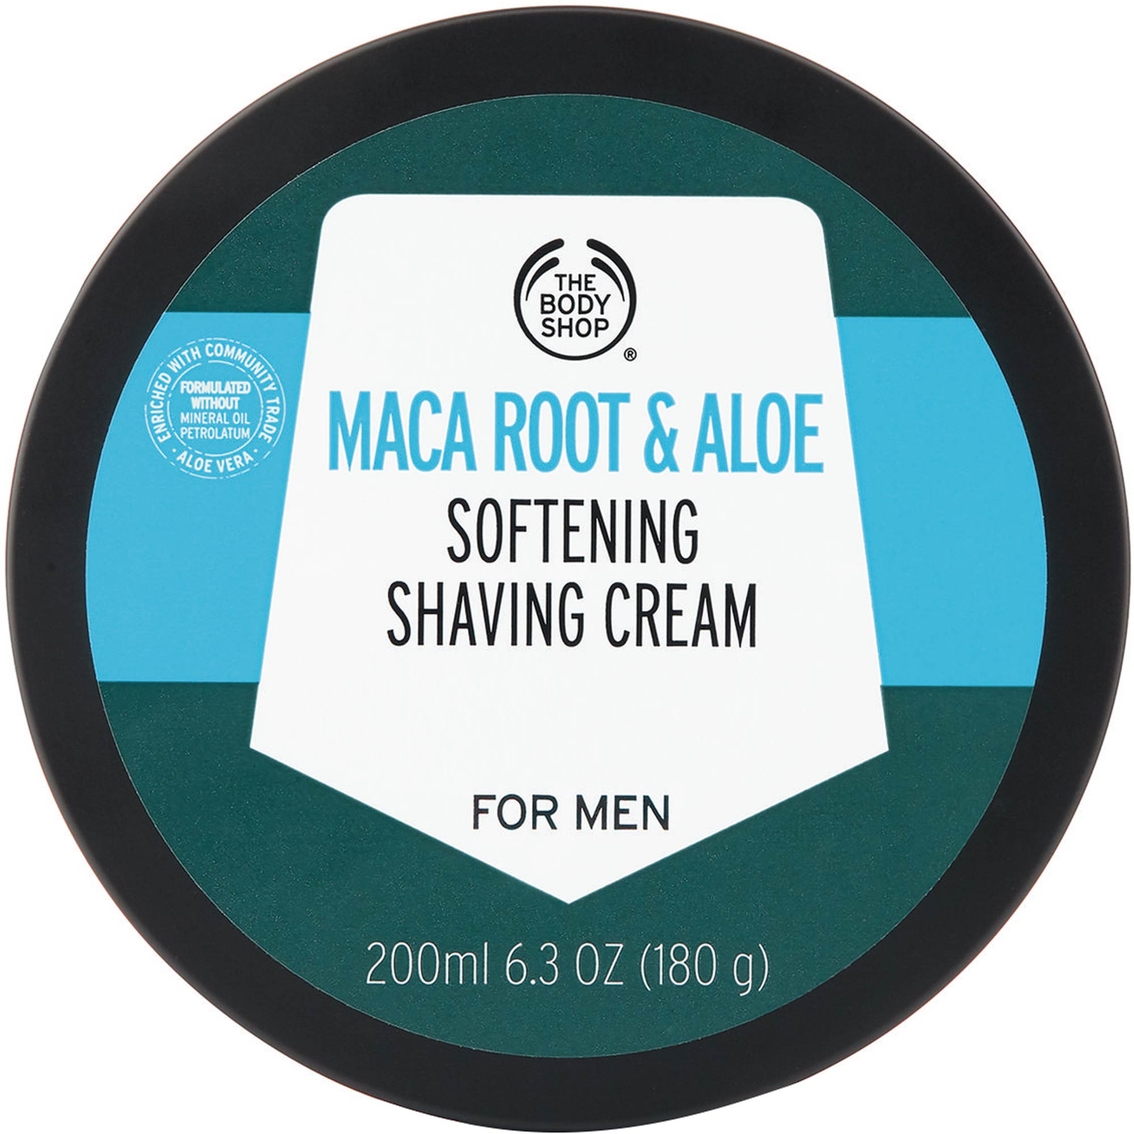 The Body Shop Maca Root and Aloe Softening Shaving Cream for Men 6.3 oz. - Image 2 of 3